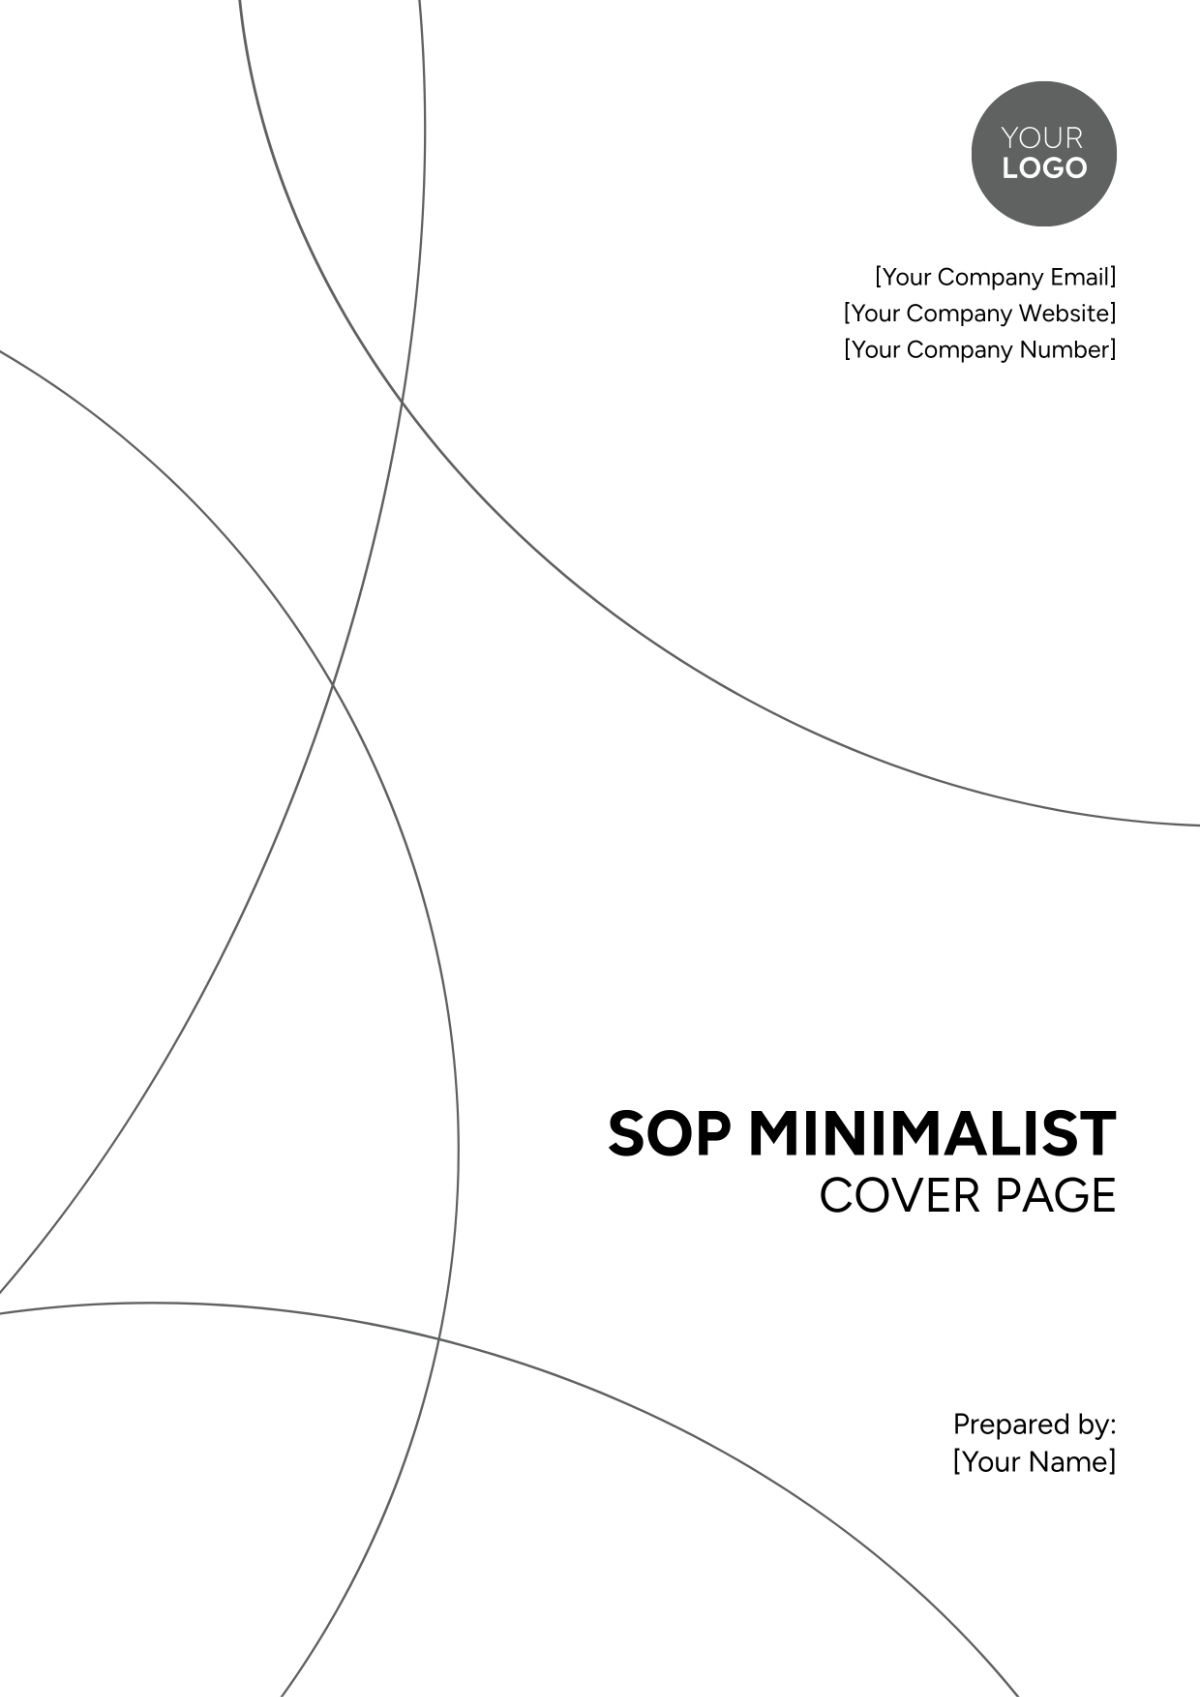 SOP Minimalist Cover Page